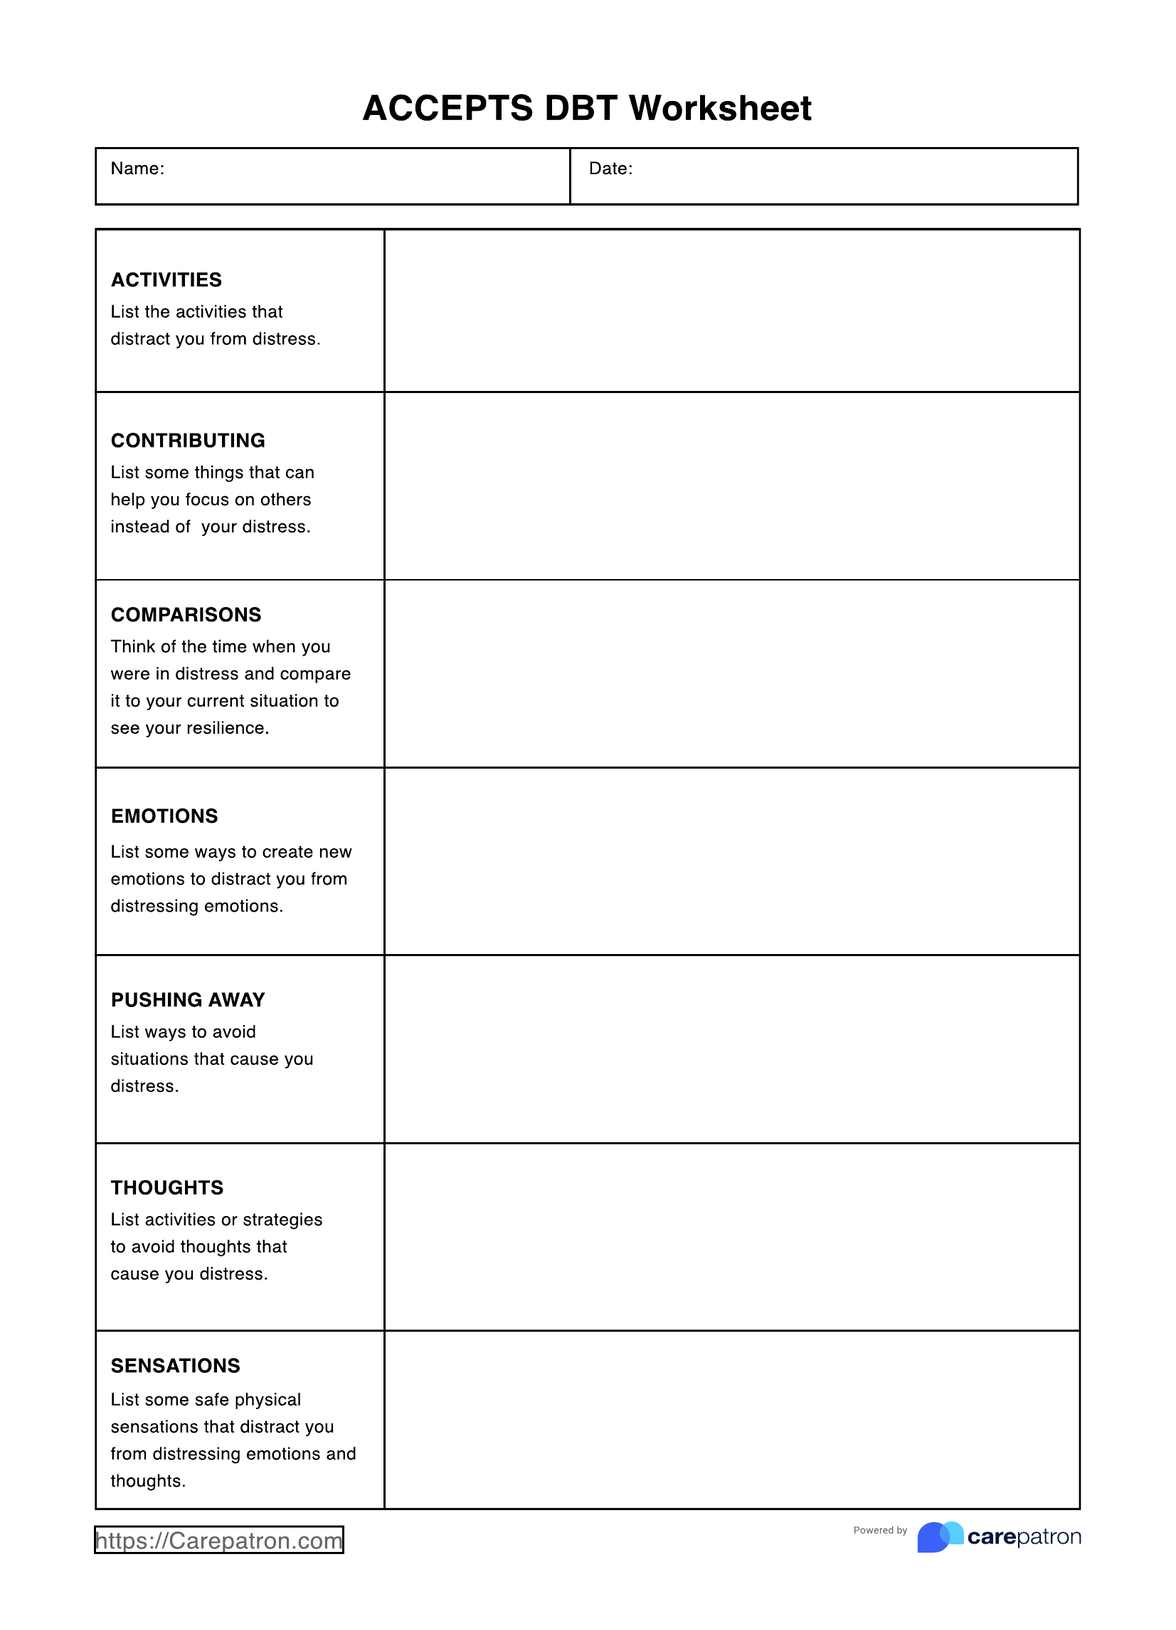 ACCEPTS DBT Worksheets PDF Example